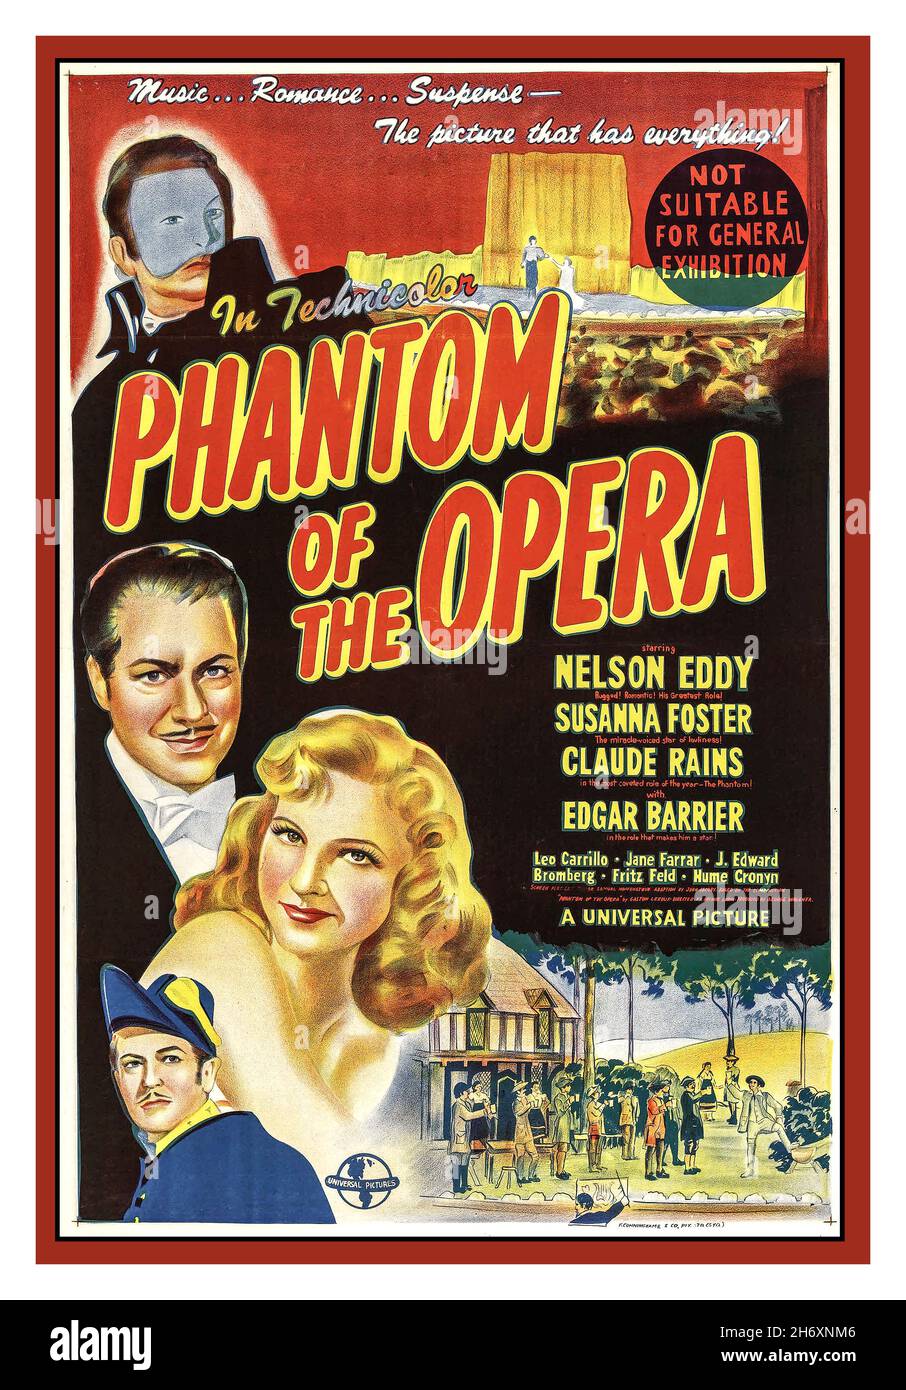 Phantom of the Opera 1940s Vintage Movie Film Poster is a 1943 American horror film directed by Arthur Lubin, loosely based on Gaston Leroux's 1910 novel The  Phantom of the Opera  Produced and distributed by Universal Pictures, the film stars Nelson Eddy, Susanna Foster and Claude Rains, and was composed by Edward Ward. Starring Claude Rains Nelson Eddy Susanna Foster Edgar Barrier Directed by Arthur Lubin. a Universal Picture Hollywood USA Stock Photo